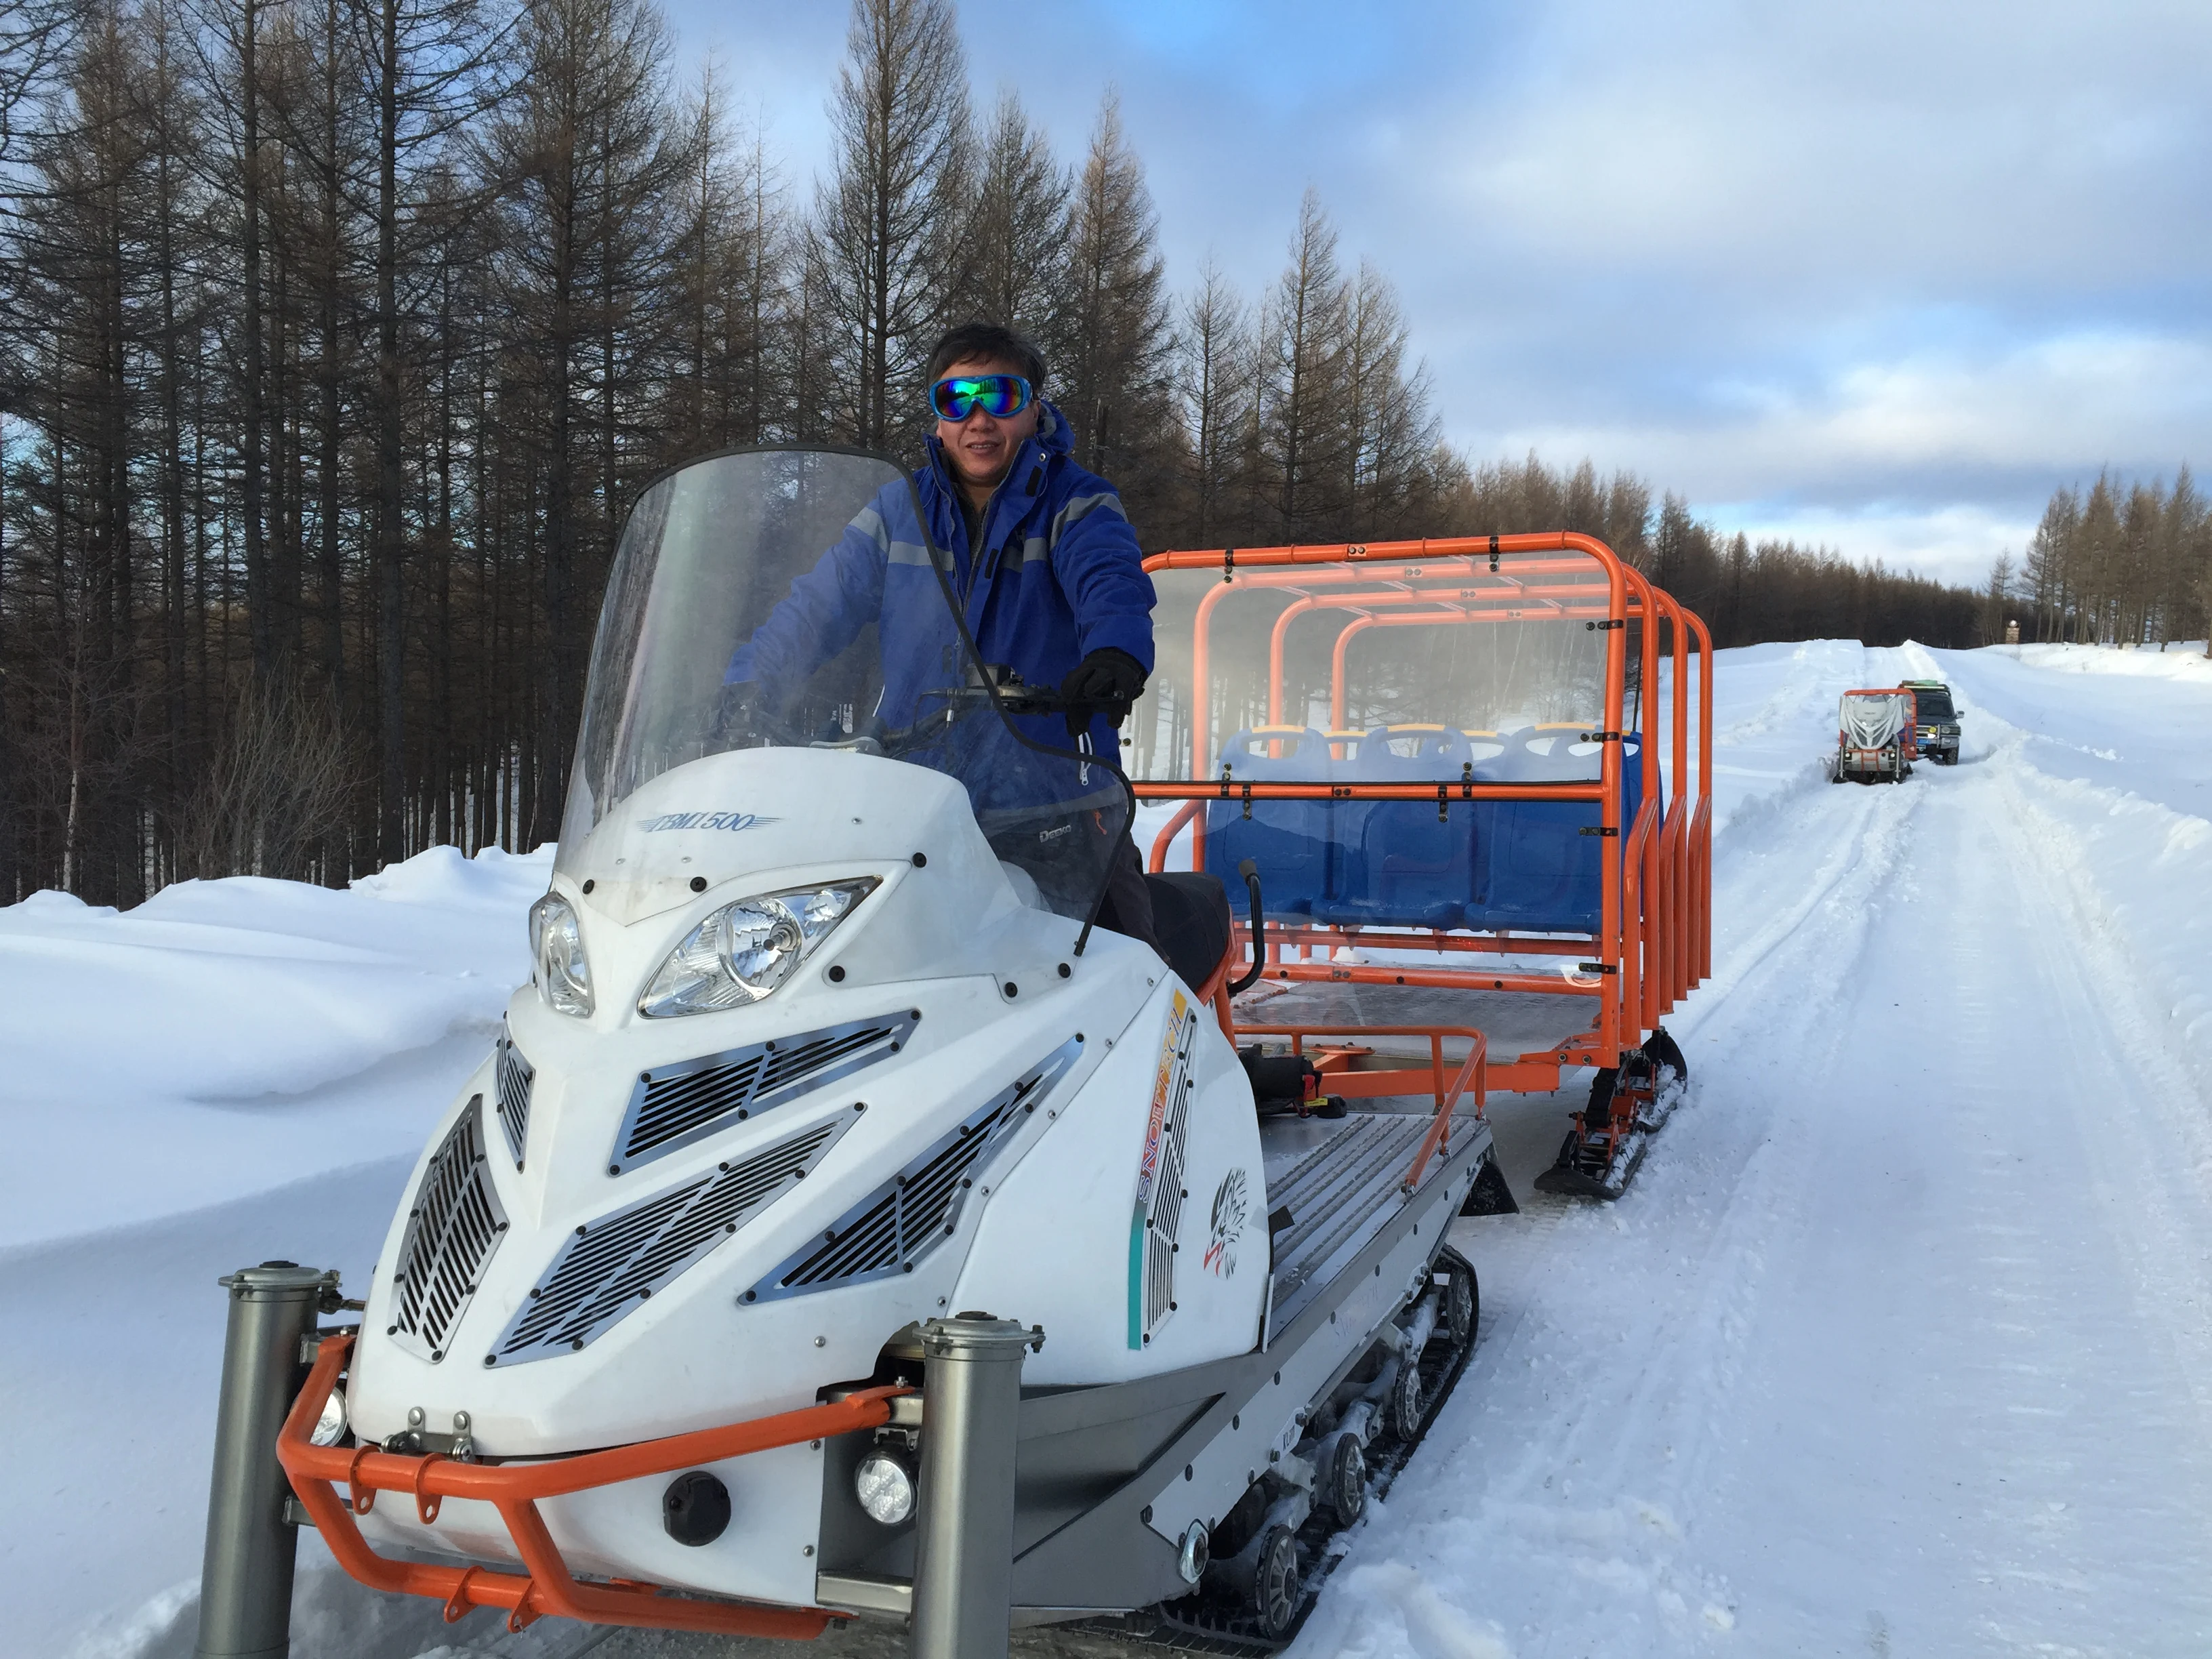 wholesale Small quad snowmobile manufactures/supplier,Small quad snowmobile factory